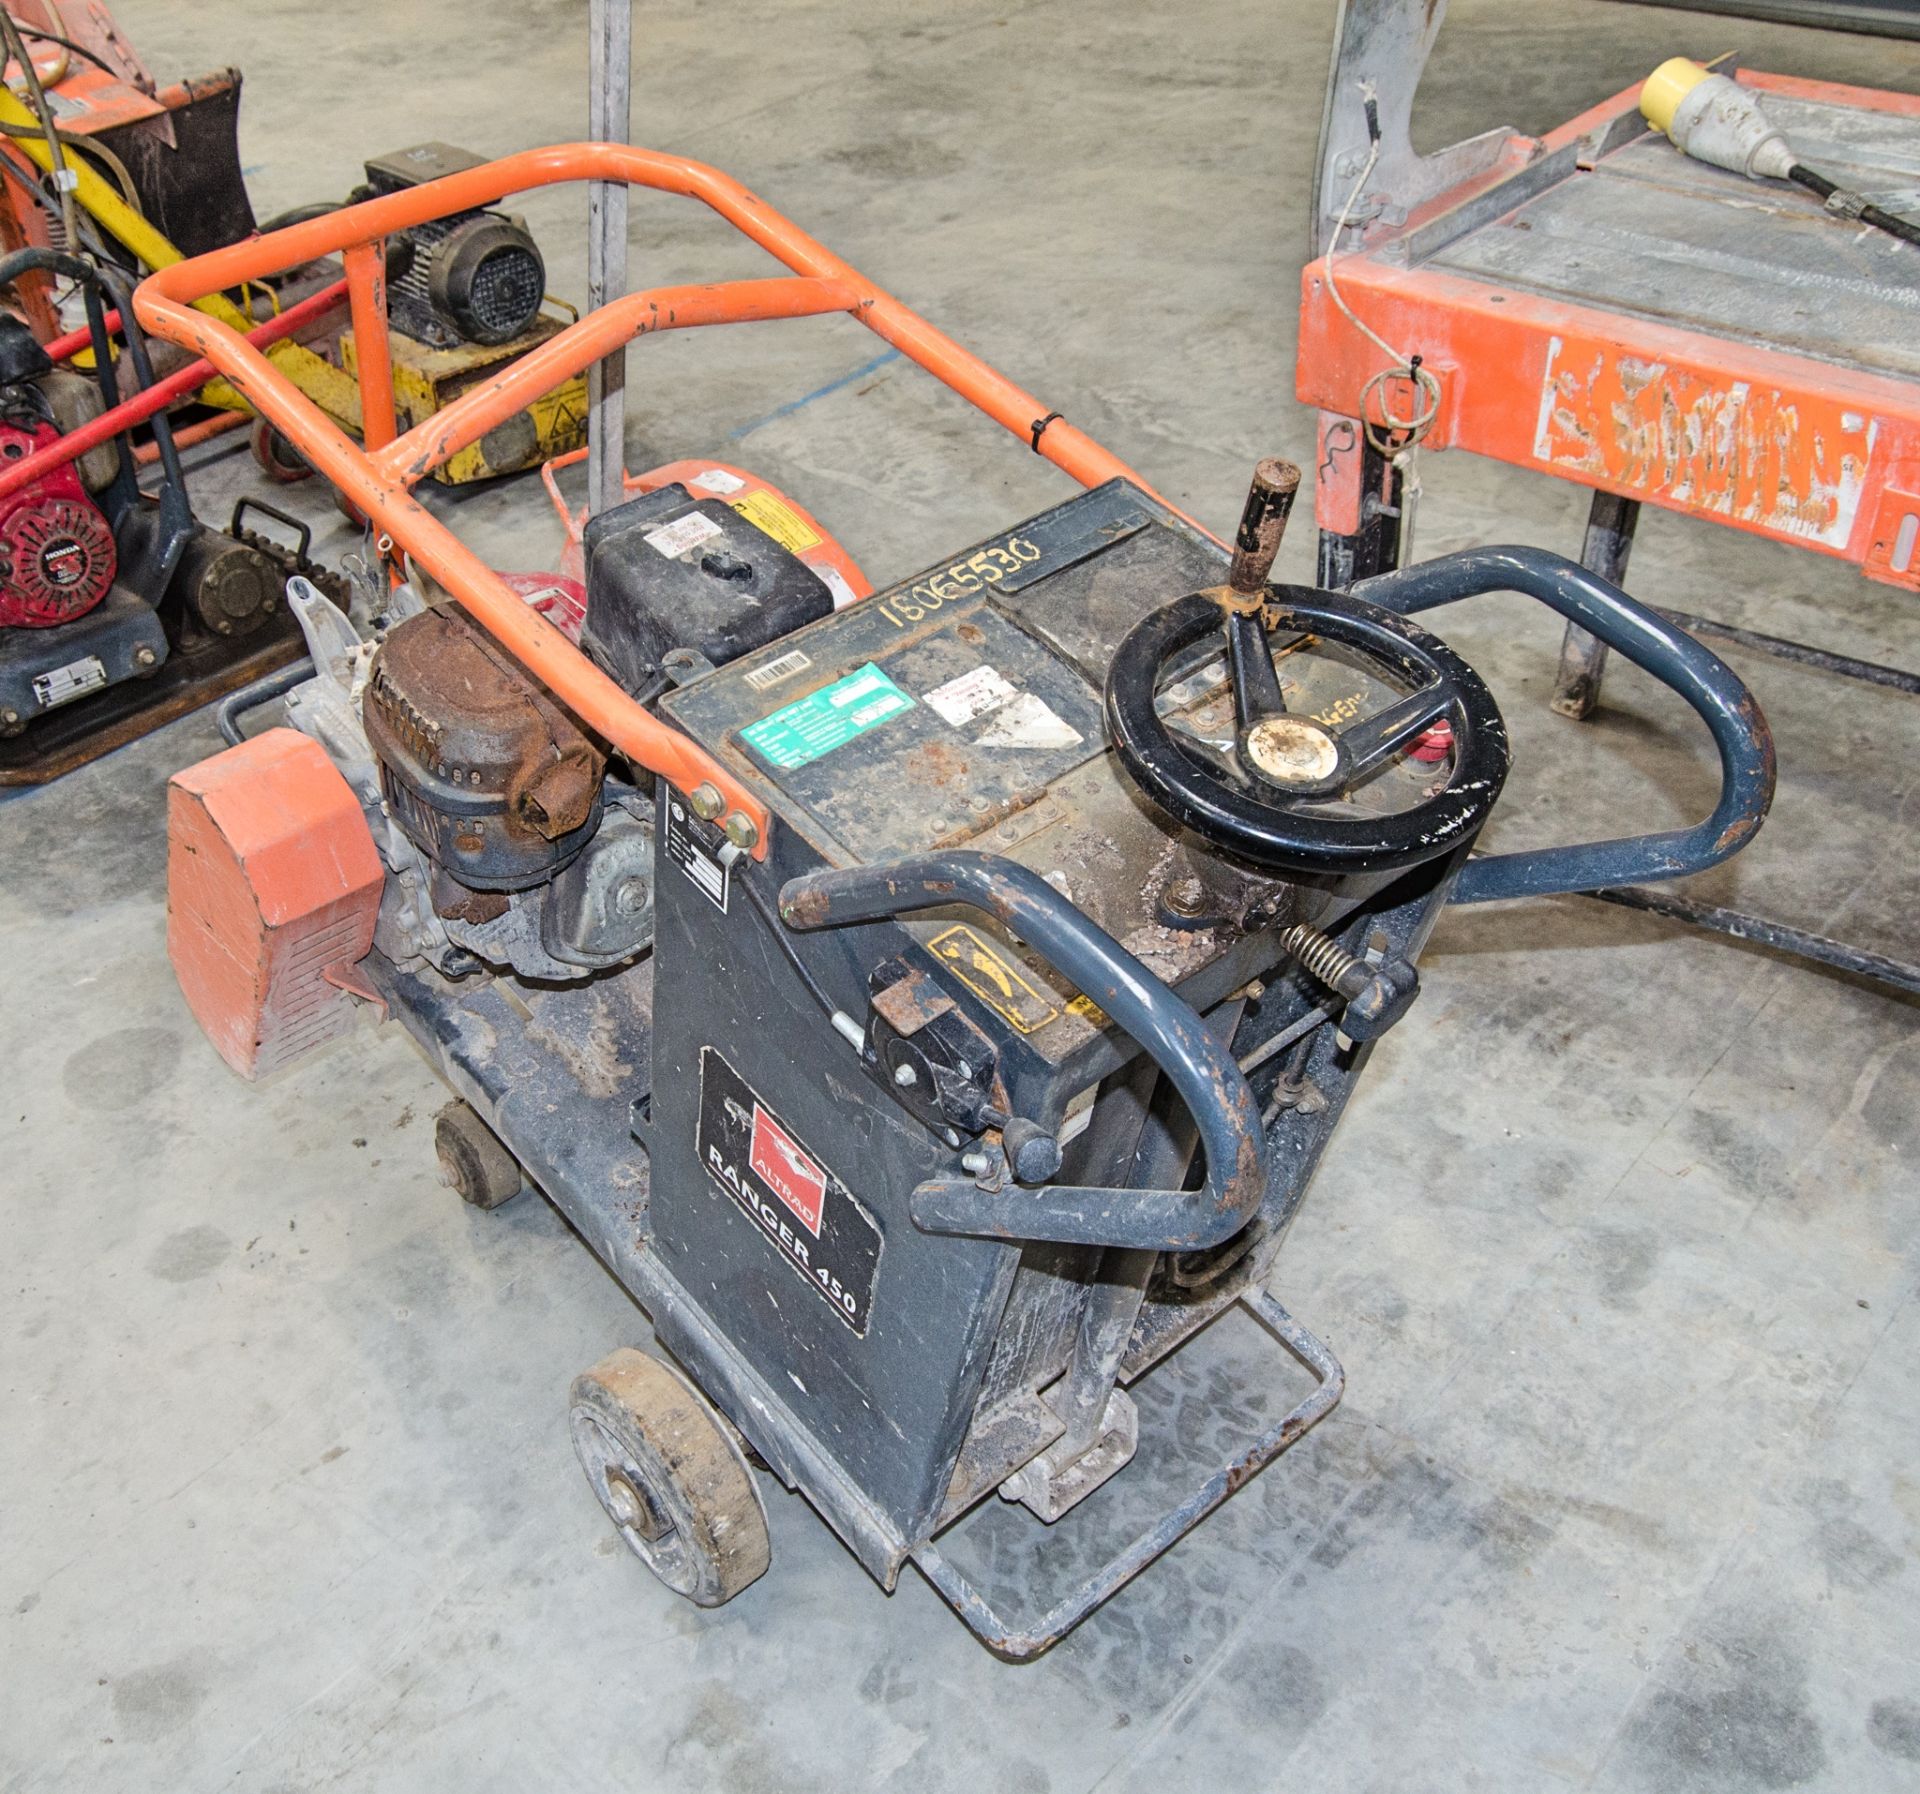 Altrad Ranger 450 petrol driven road saw ** Pull cord assembly and petrol tank missing ** 18065530 - Image 2 of 3